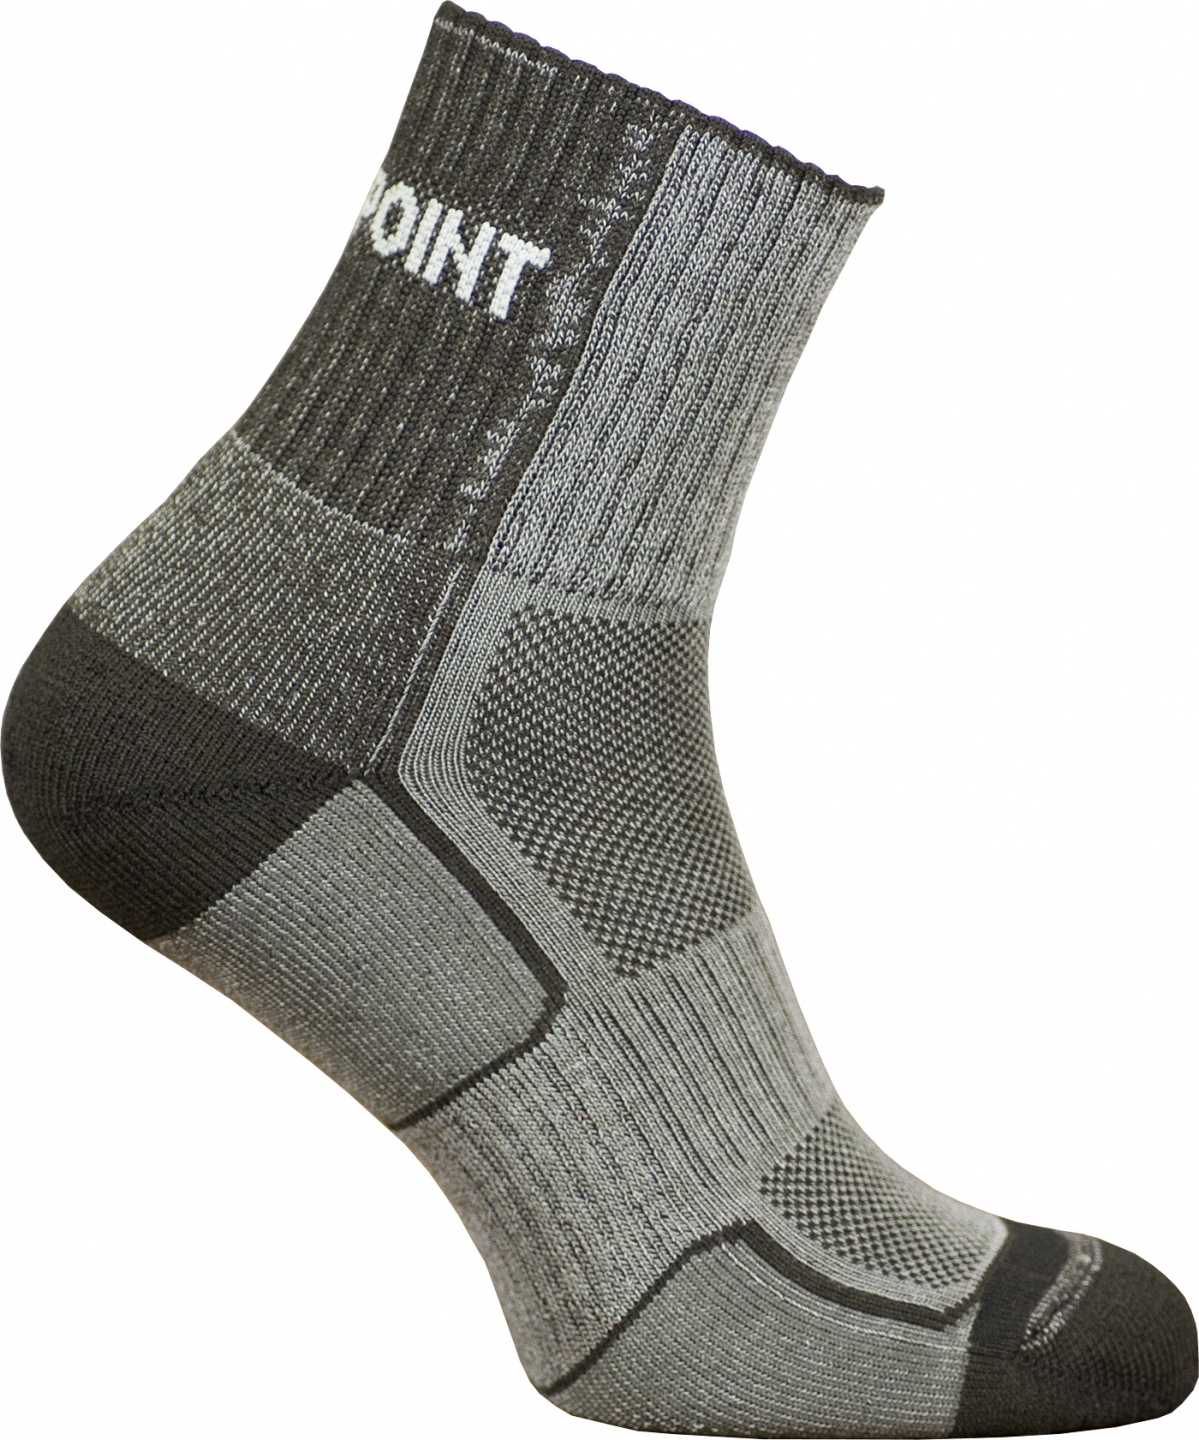 High Point ponožky STEP BAMBOO Velikost: M (35-38)